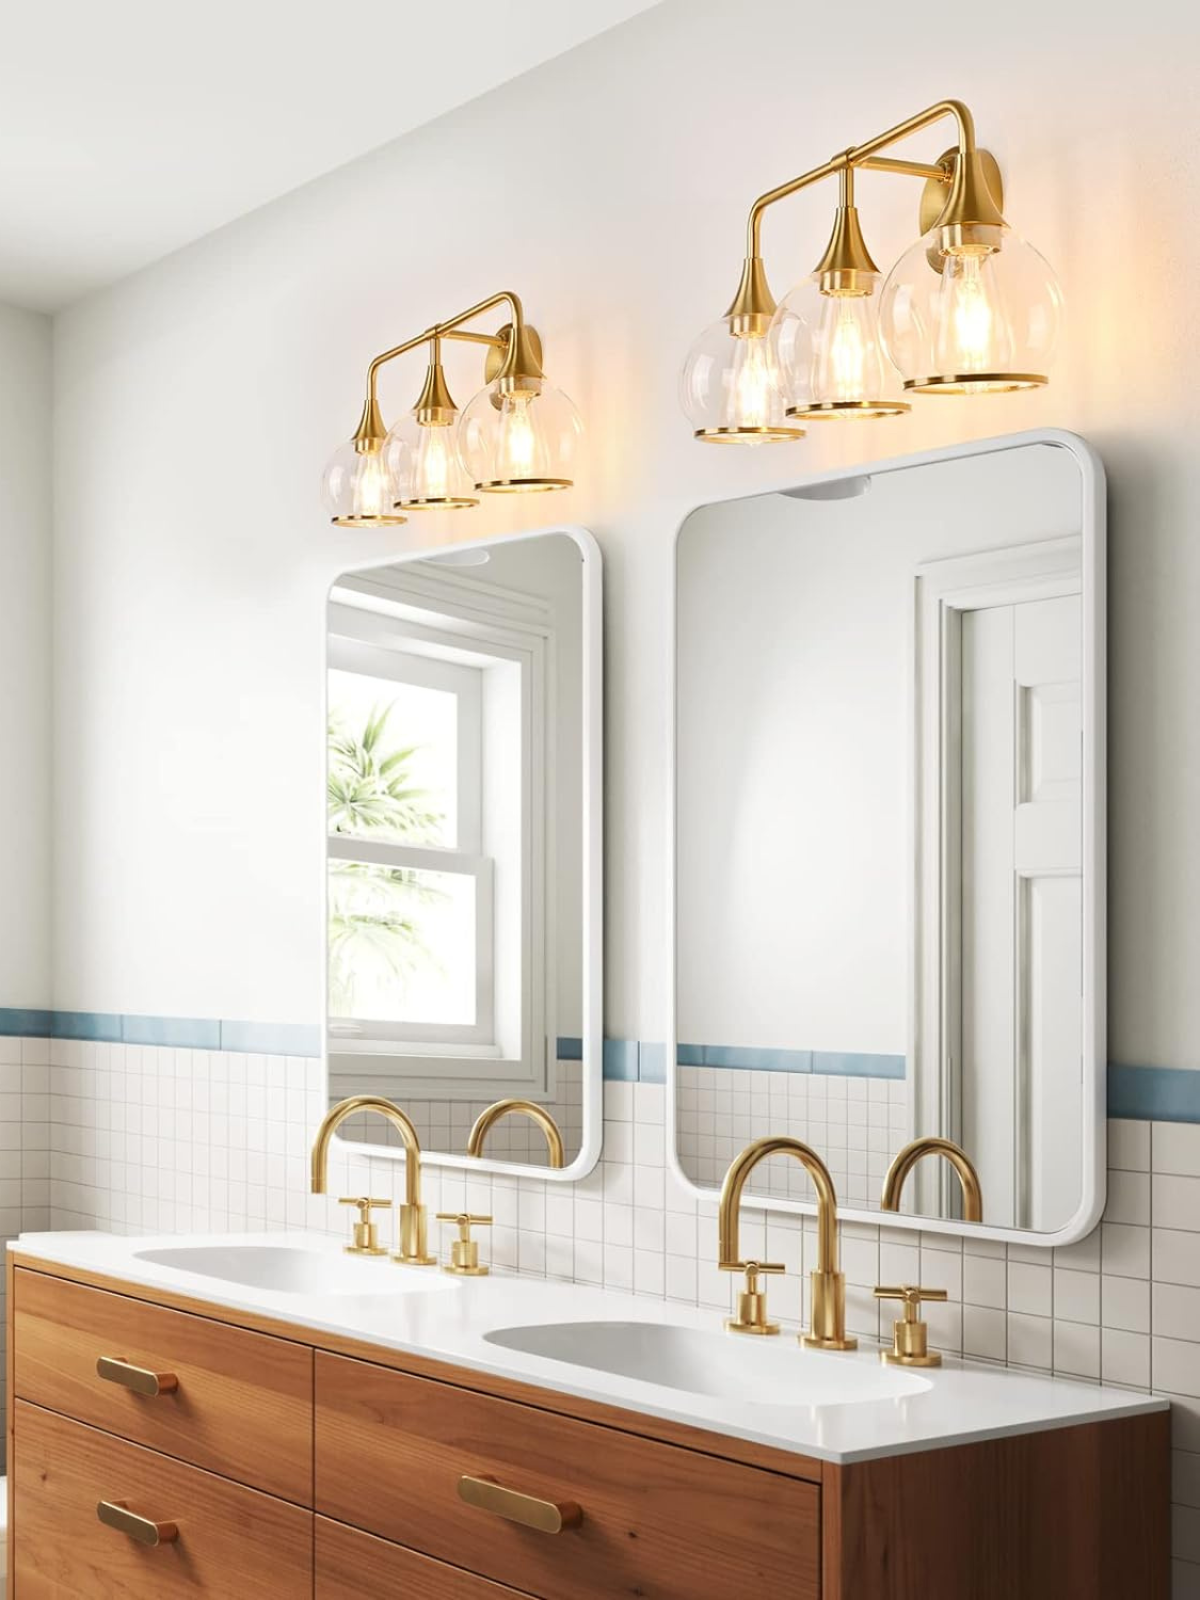 Gold Bathroom Vanity Light 3-Lights Bathroom Light Fixtures Over Mirror with Clear Glass Shade 22.4 inch Wall Sconce Lighting Bath